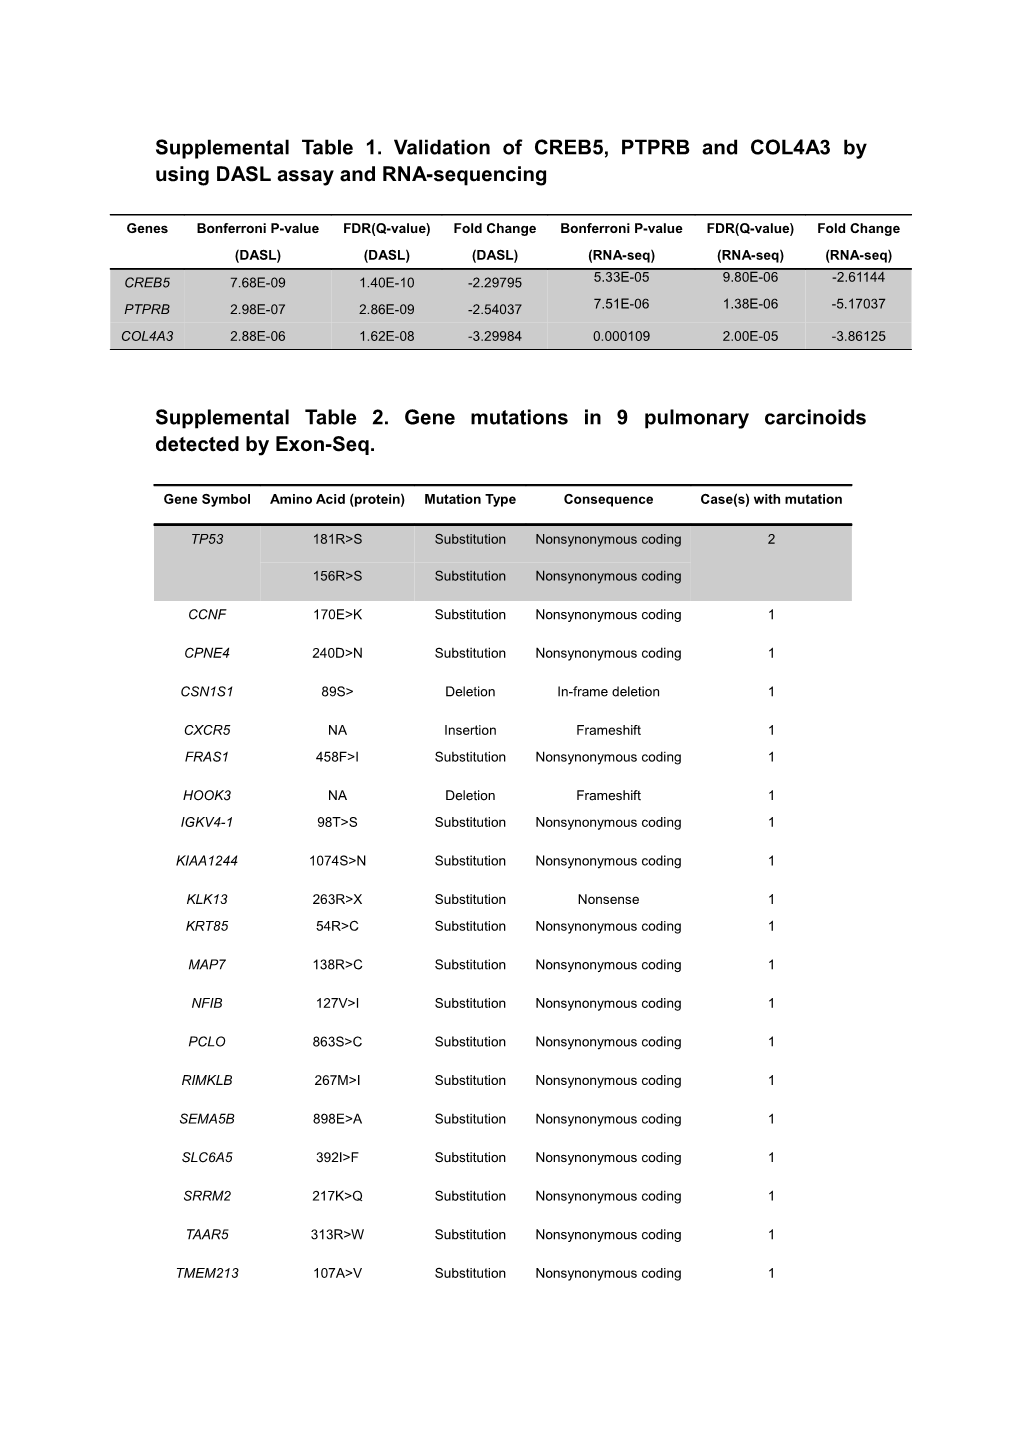 Supplemental Table 1. Validation of CREB5, PTPRB Andcol4a3by Using DASL Assay And